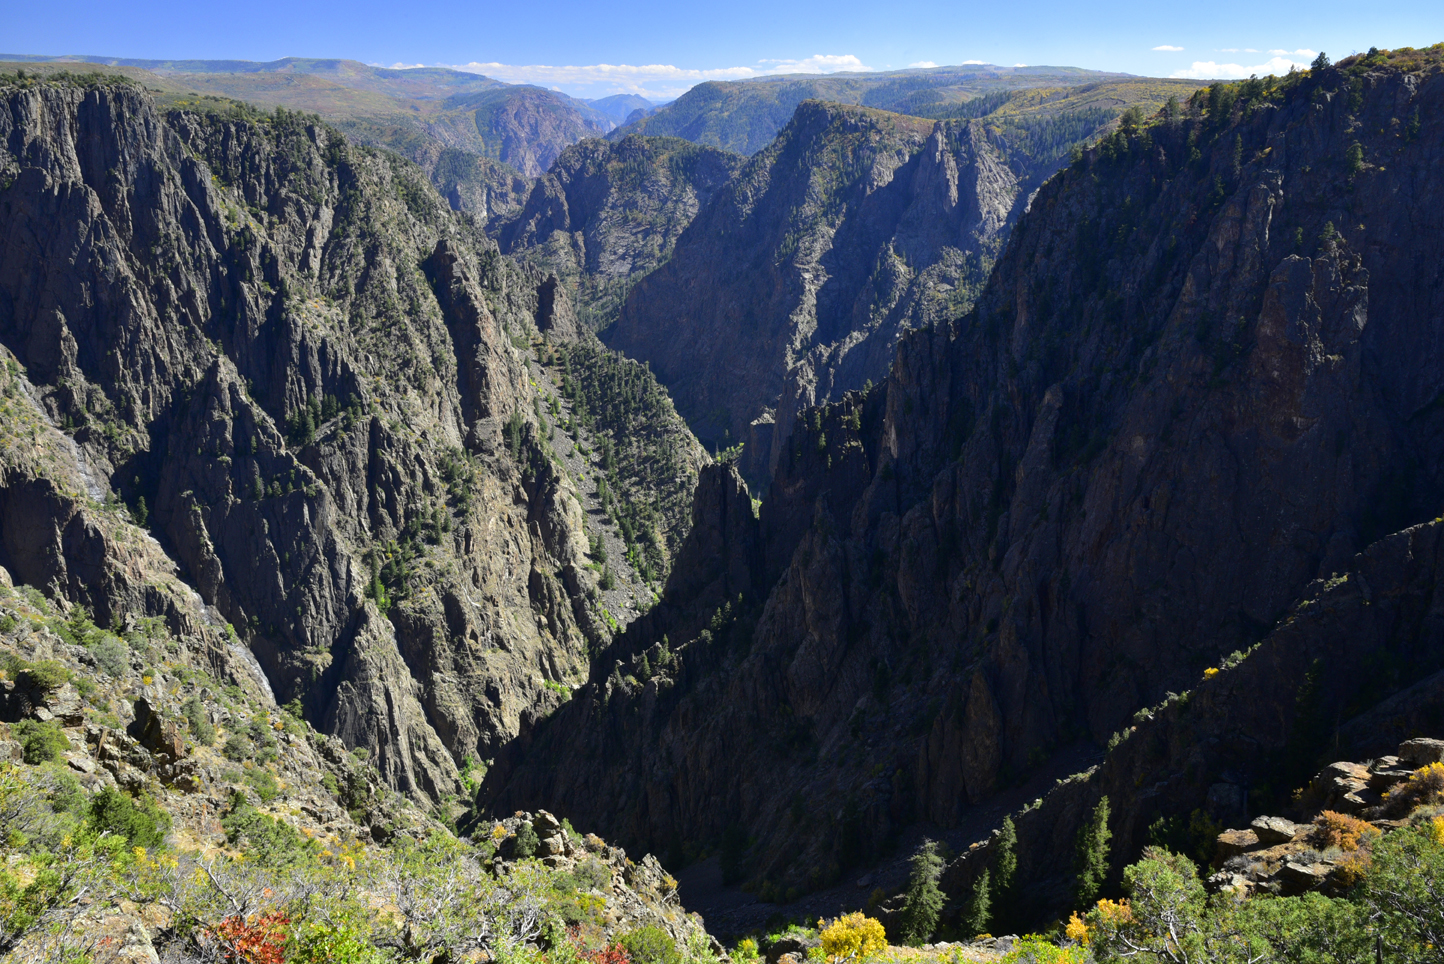  View from Tomichi Point  -  Black Canyon of the Gunnison National Park, Colorado